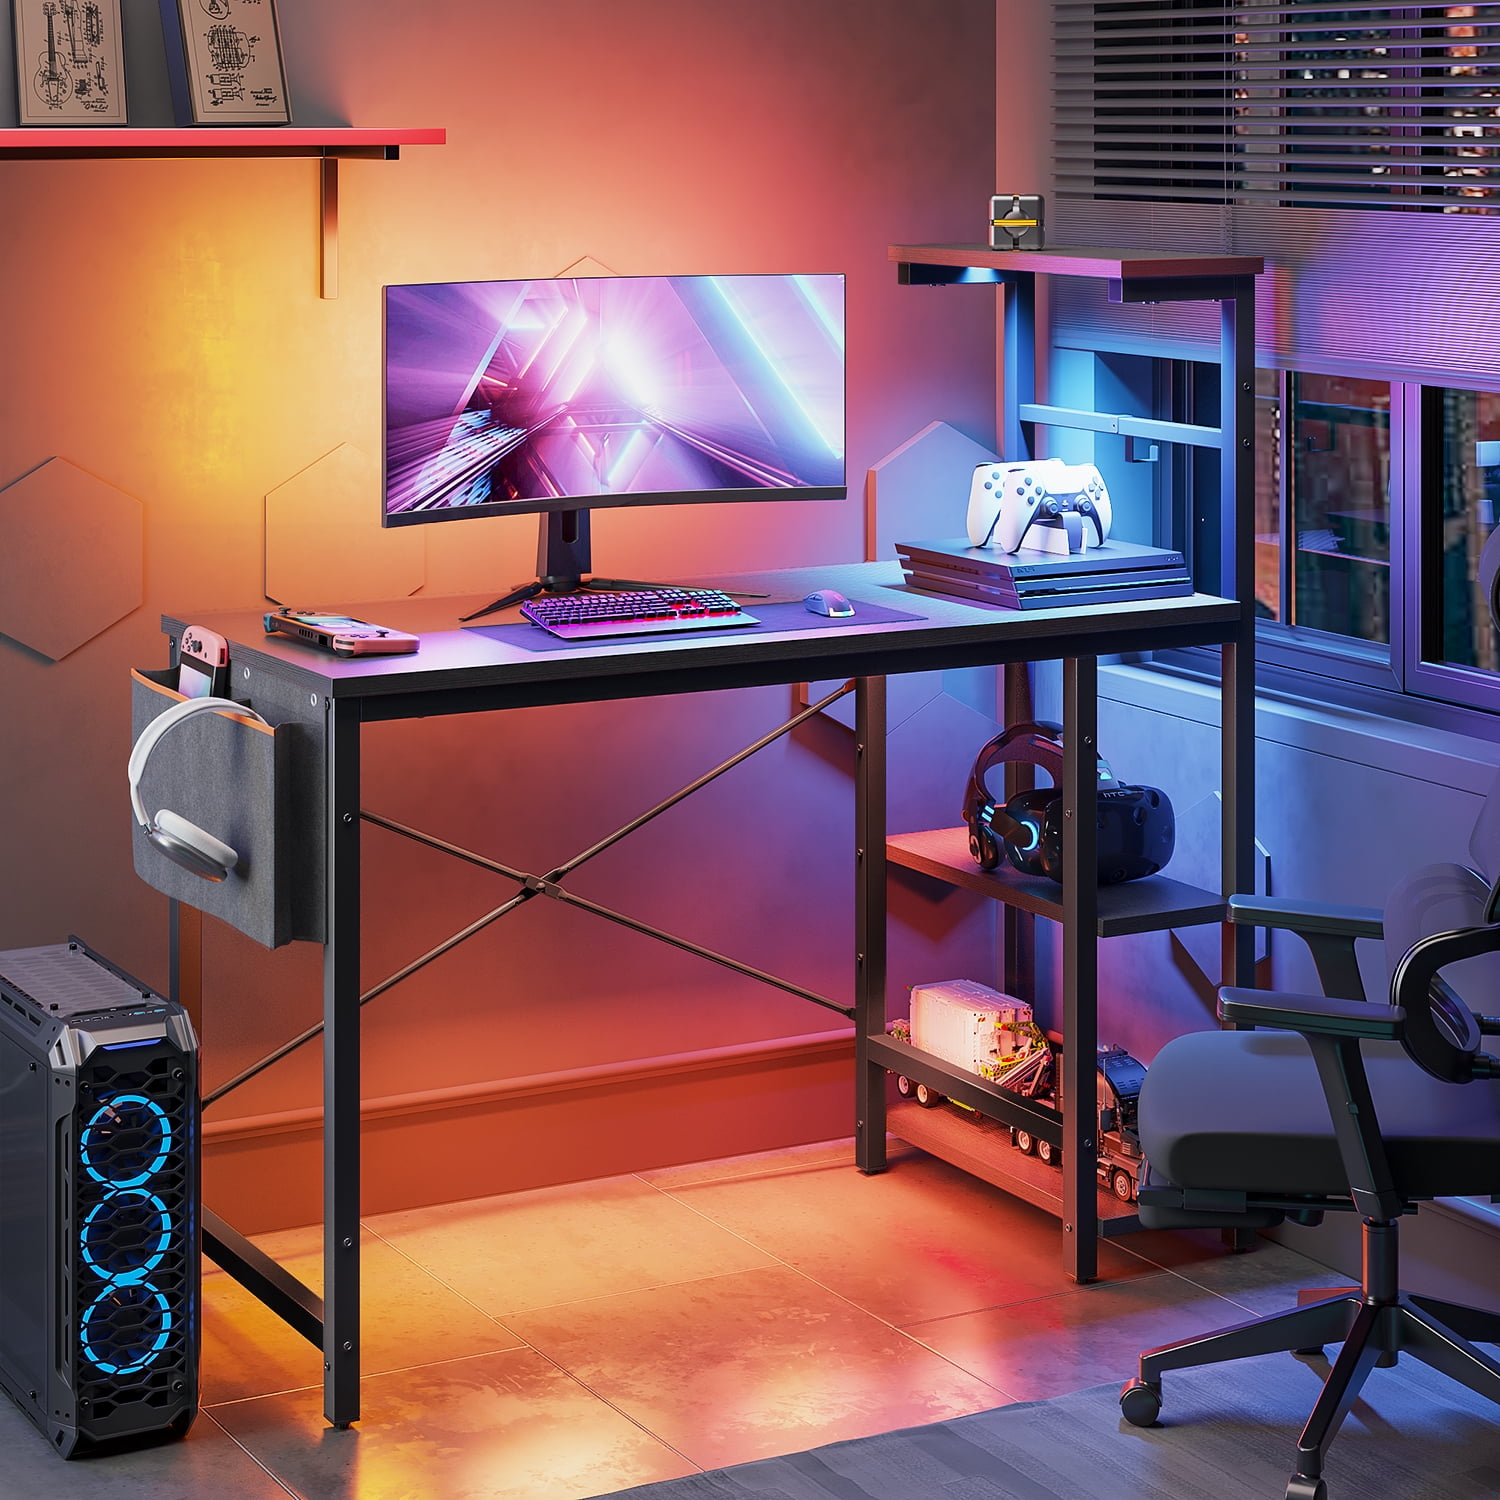 Bestier Reversible 44 inch Computer Desk with LED Lights Gaming